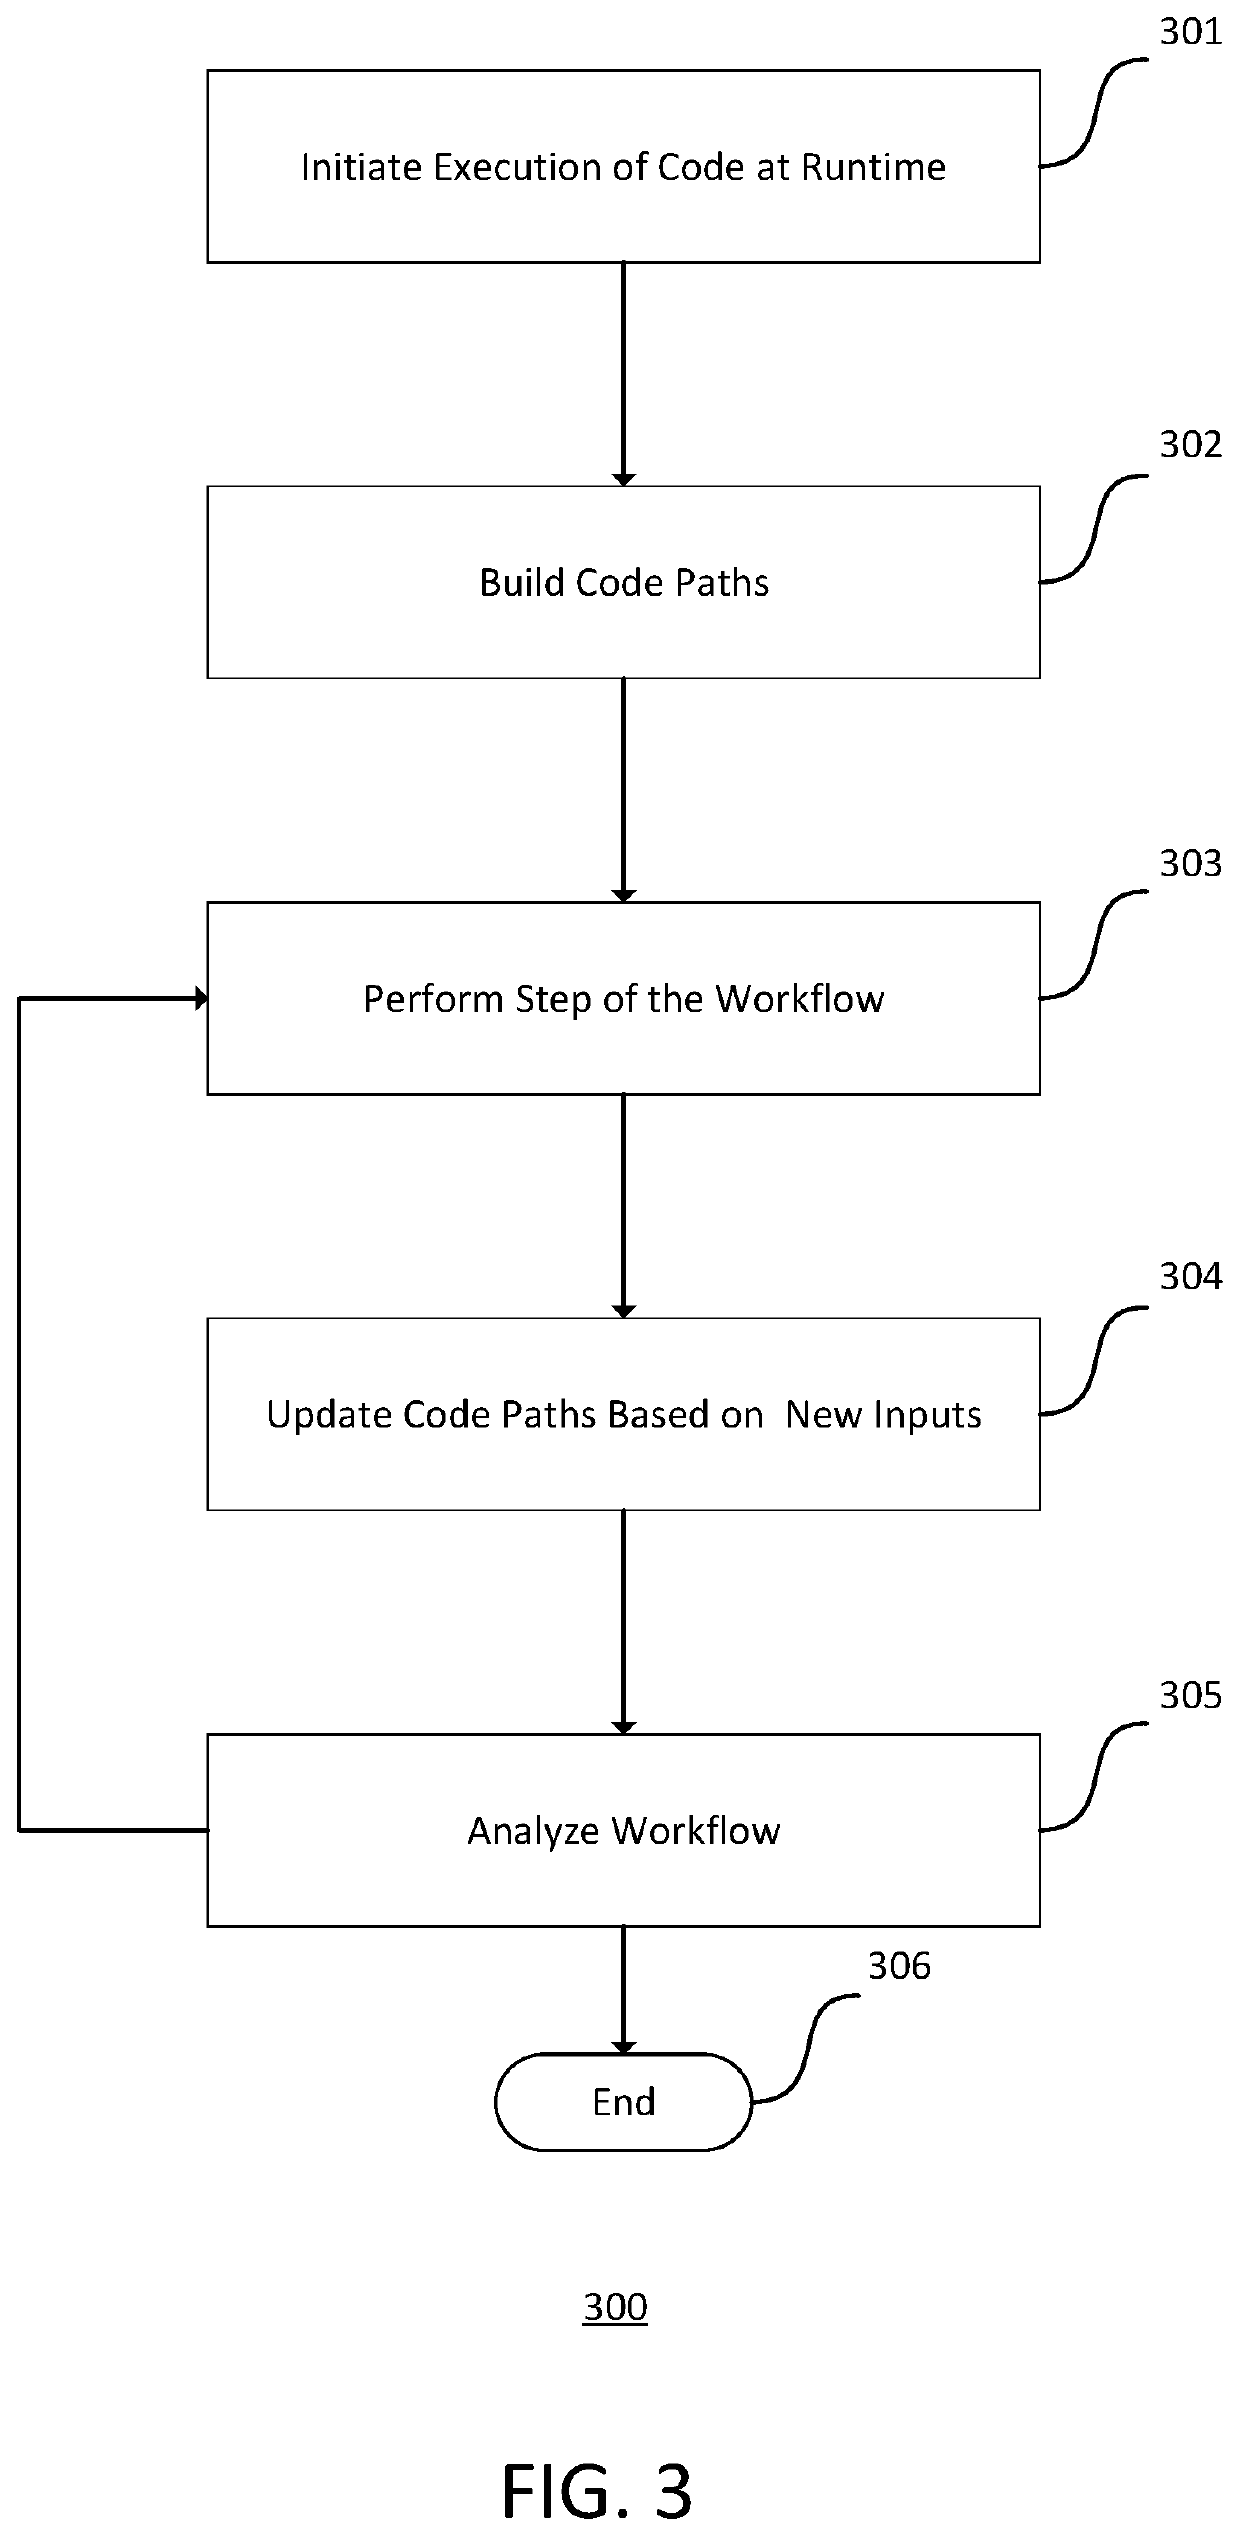 Representation and analysis of workflows using abstract syntax trees